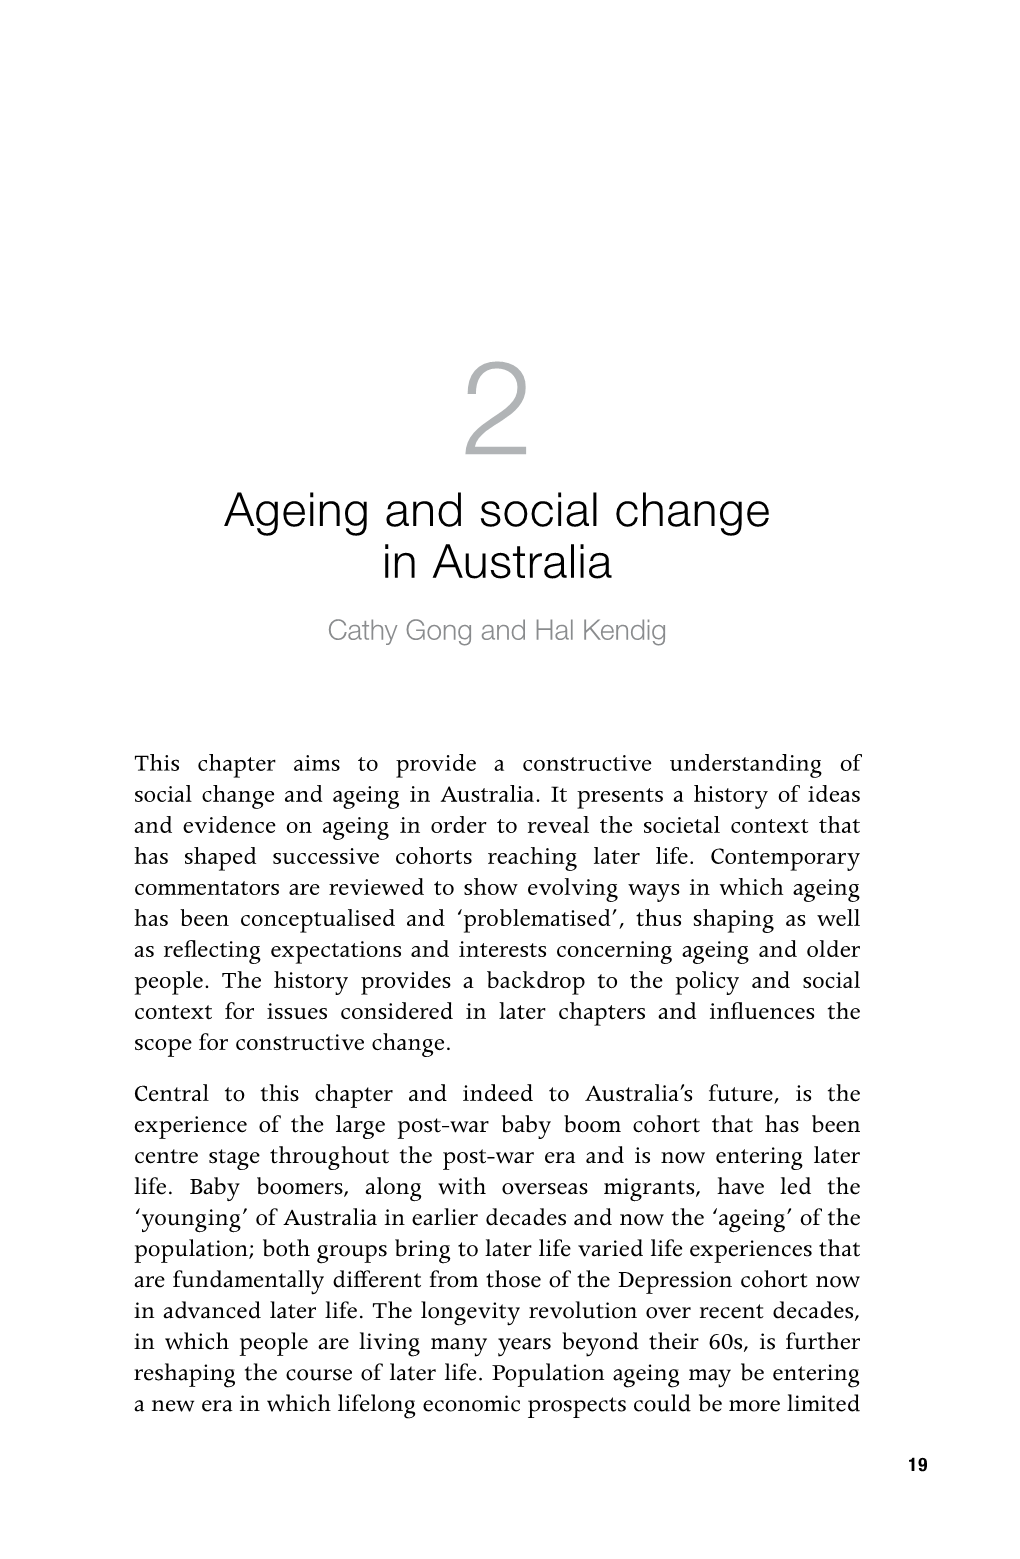 Ageing and Social Change in Australia Cathy Gong and Hal Kendig